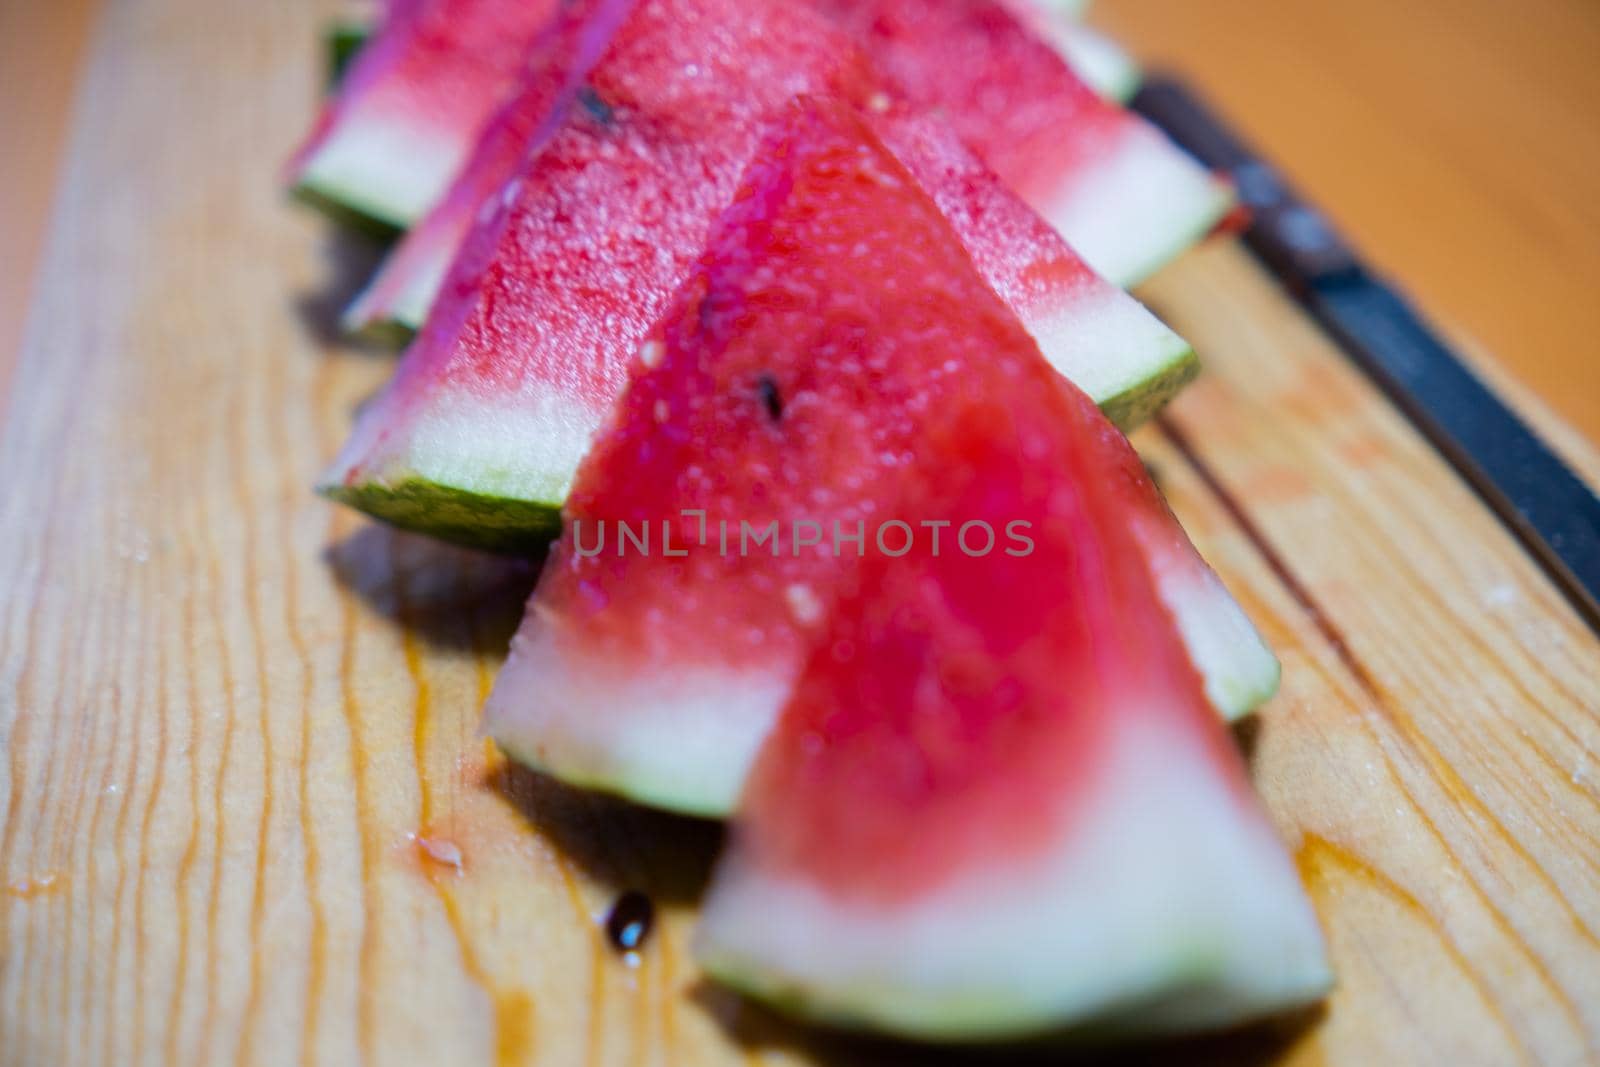 Close-up of fresh and juicy watermelon slices and knife on wooden surface. Row of tasty sliced red tropical fruit on wooden table. Healthy food and eating